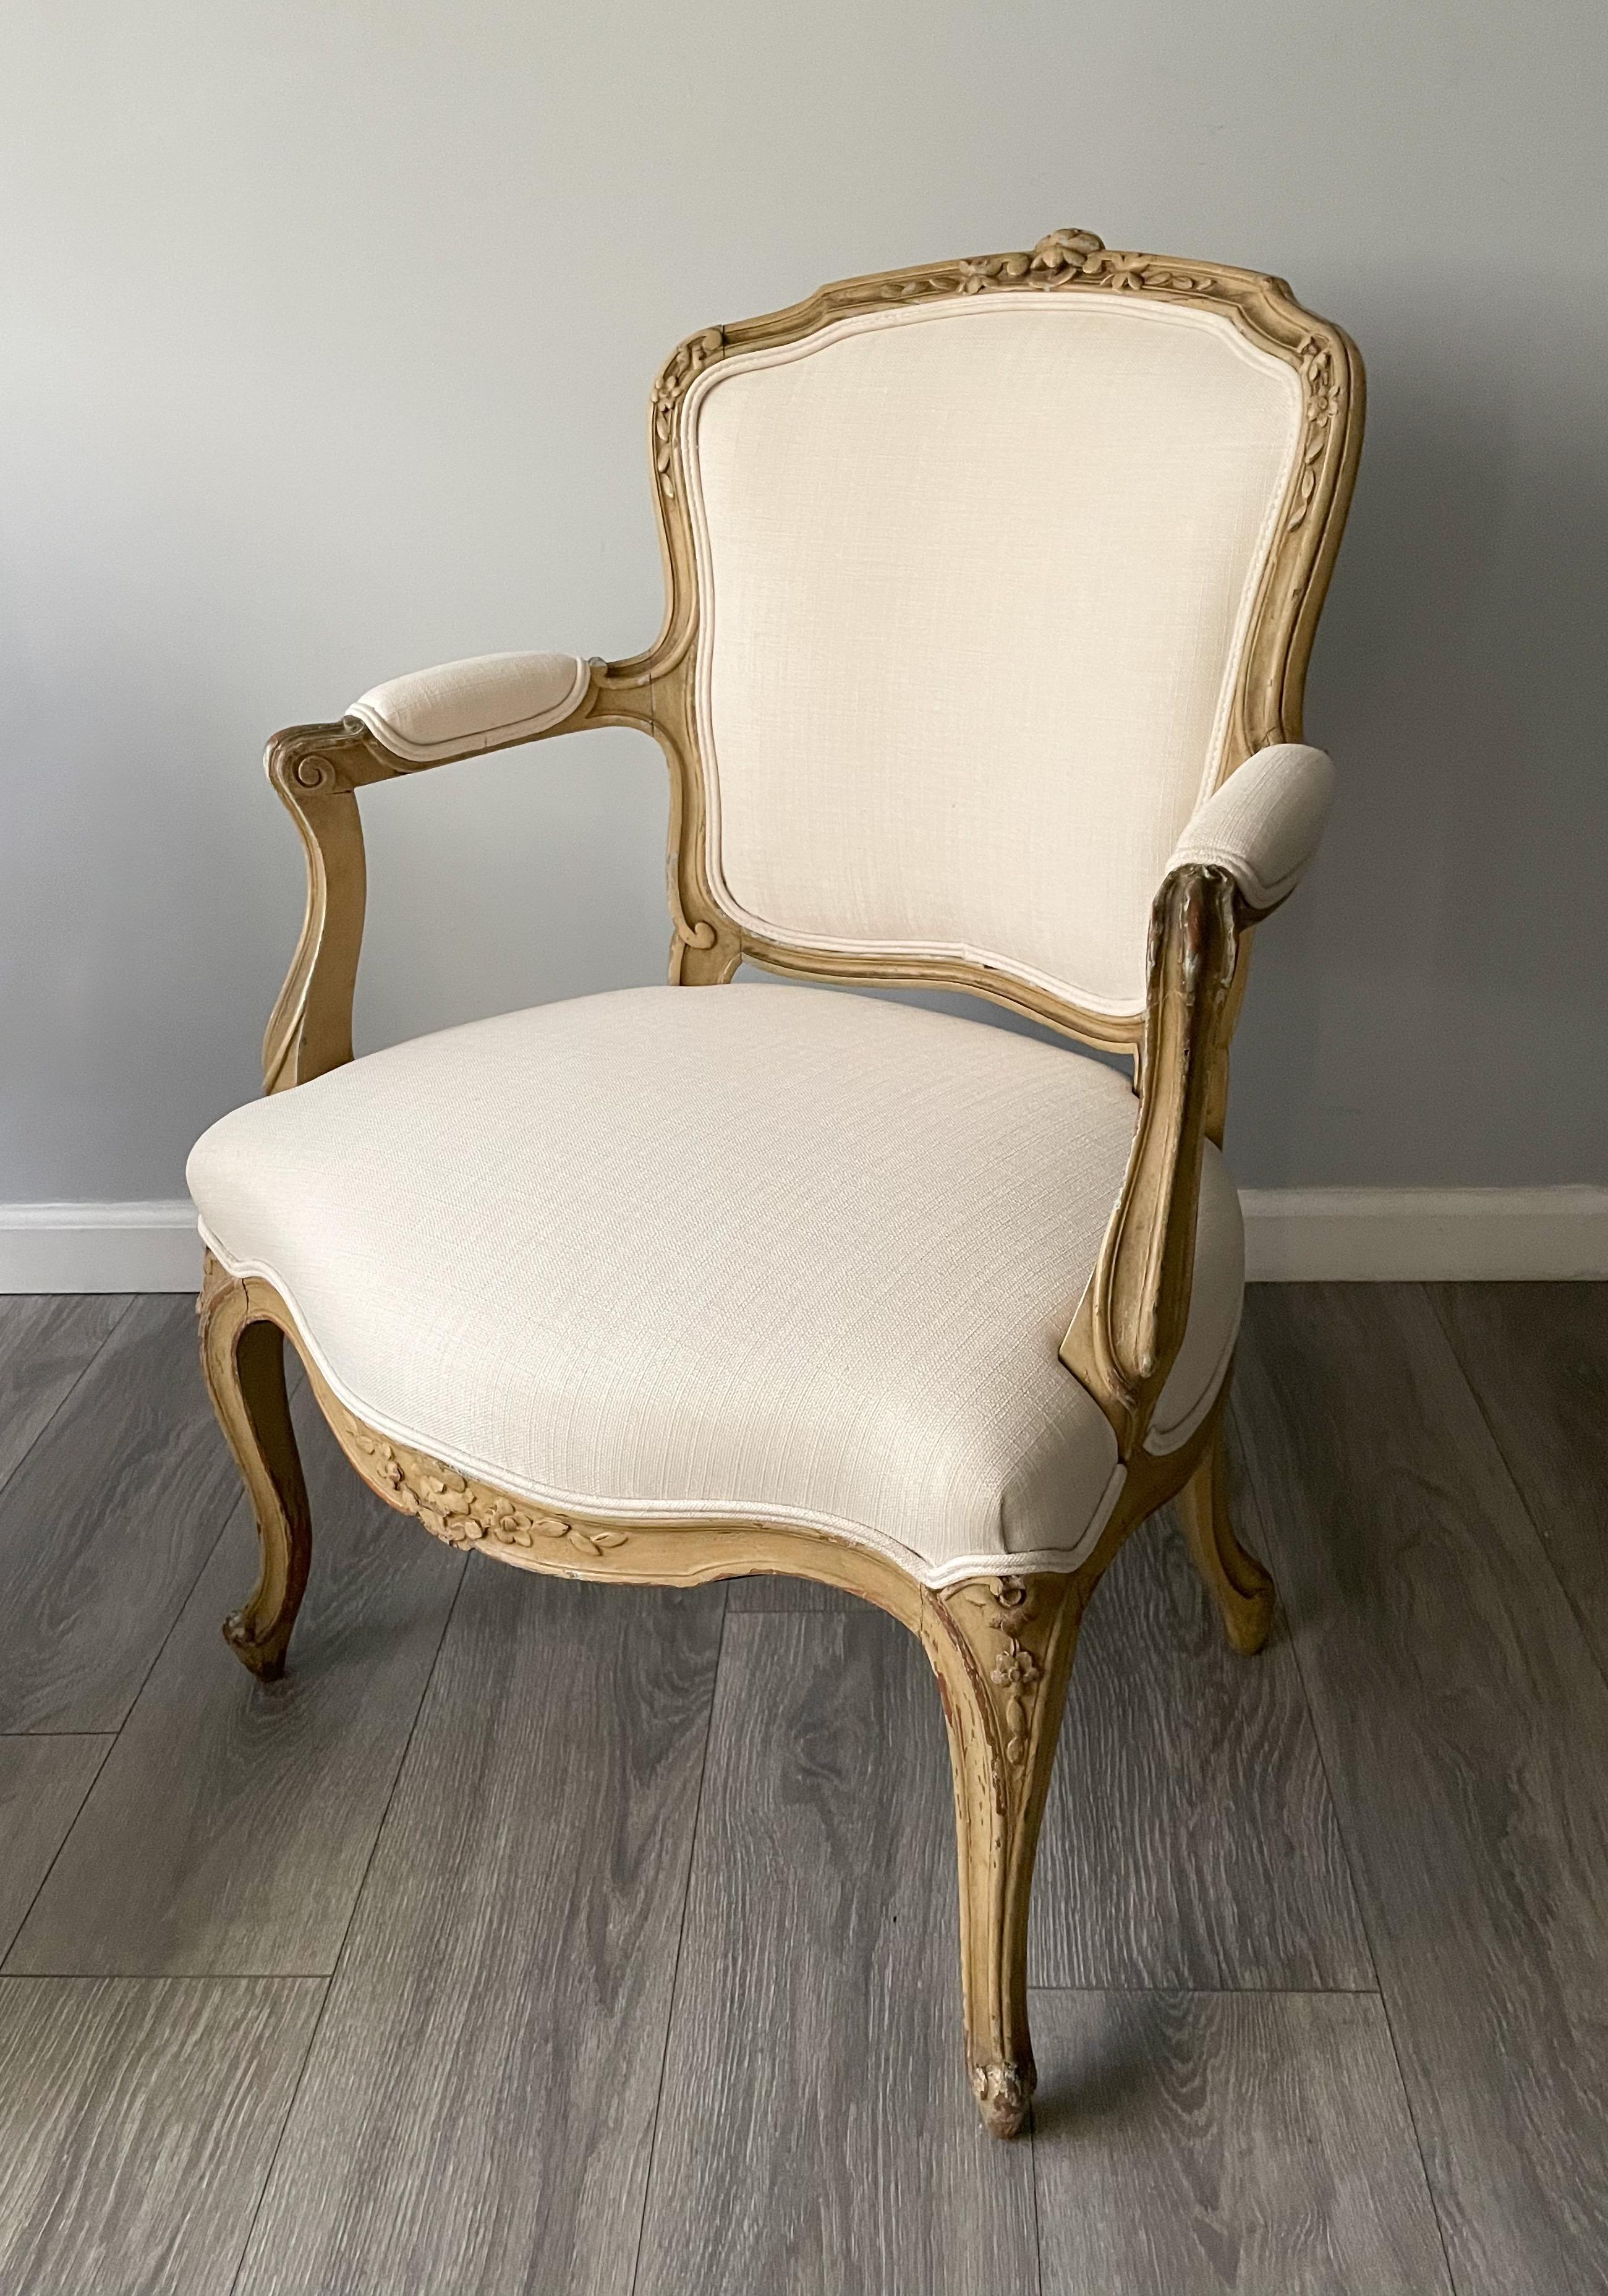 Pair of Petite French Louis XVI-Style Chairs In Good Condition For Sale In Los Angeles, CA